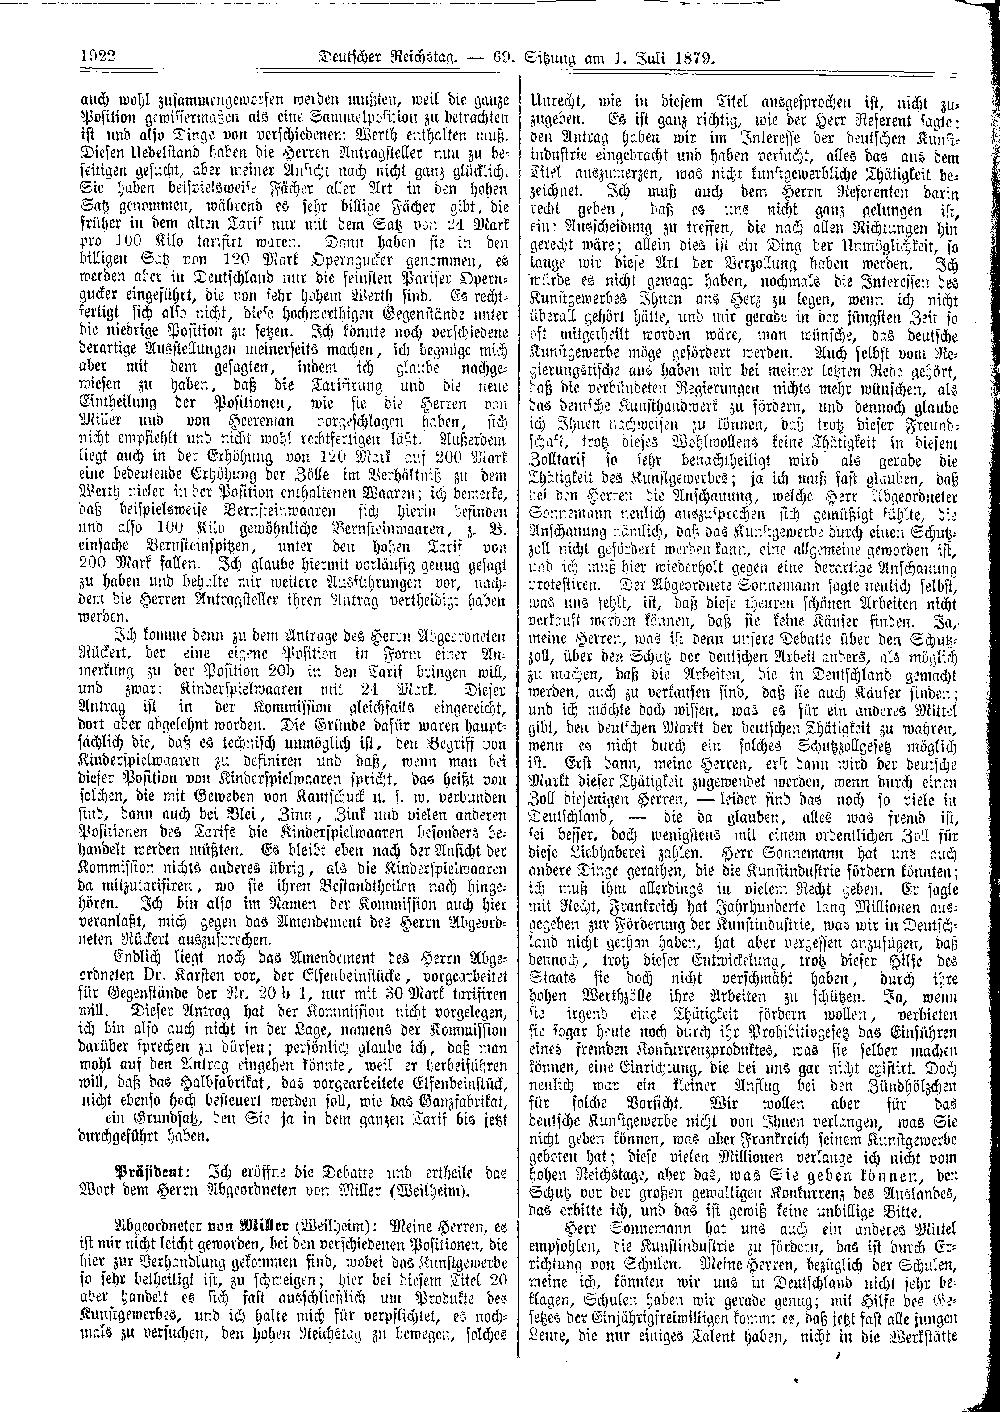 Scan of page 1922